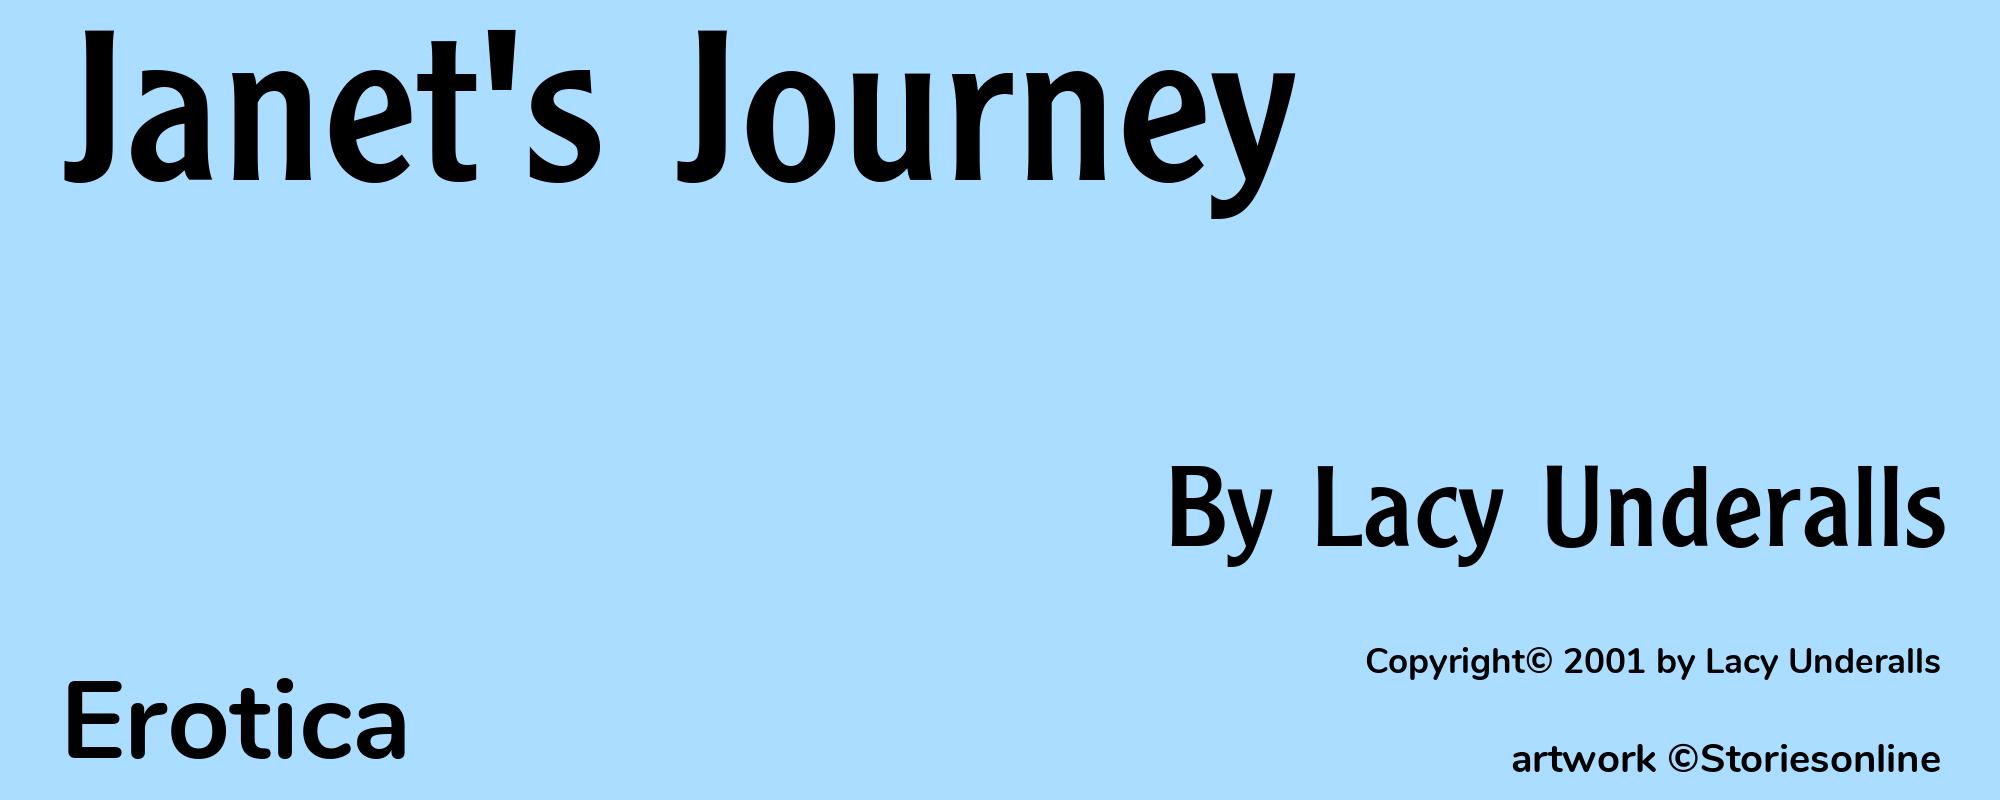 Janet's Journey - Cover